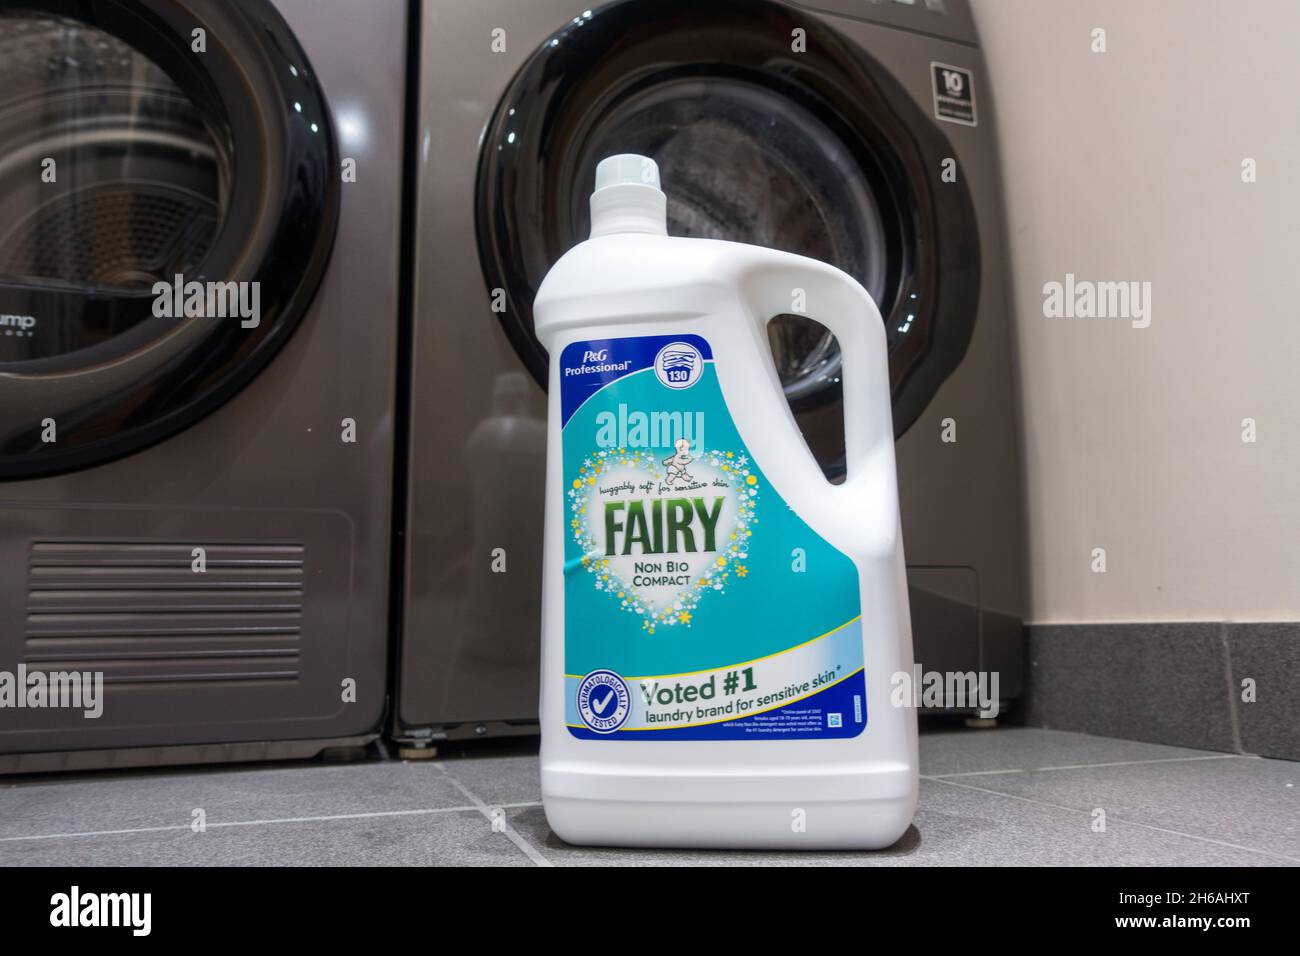 Fairy washing liquid bottle in front of a Washing machine in laundry room Stock Photo